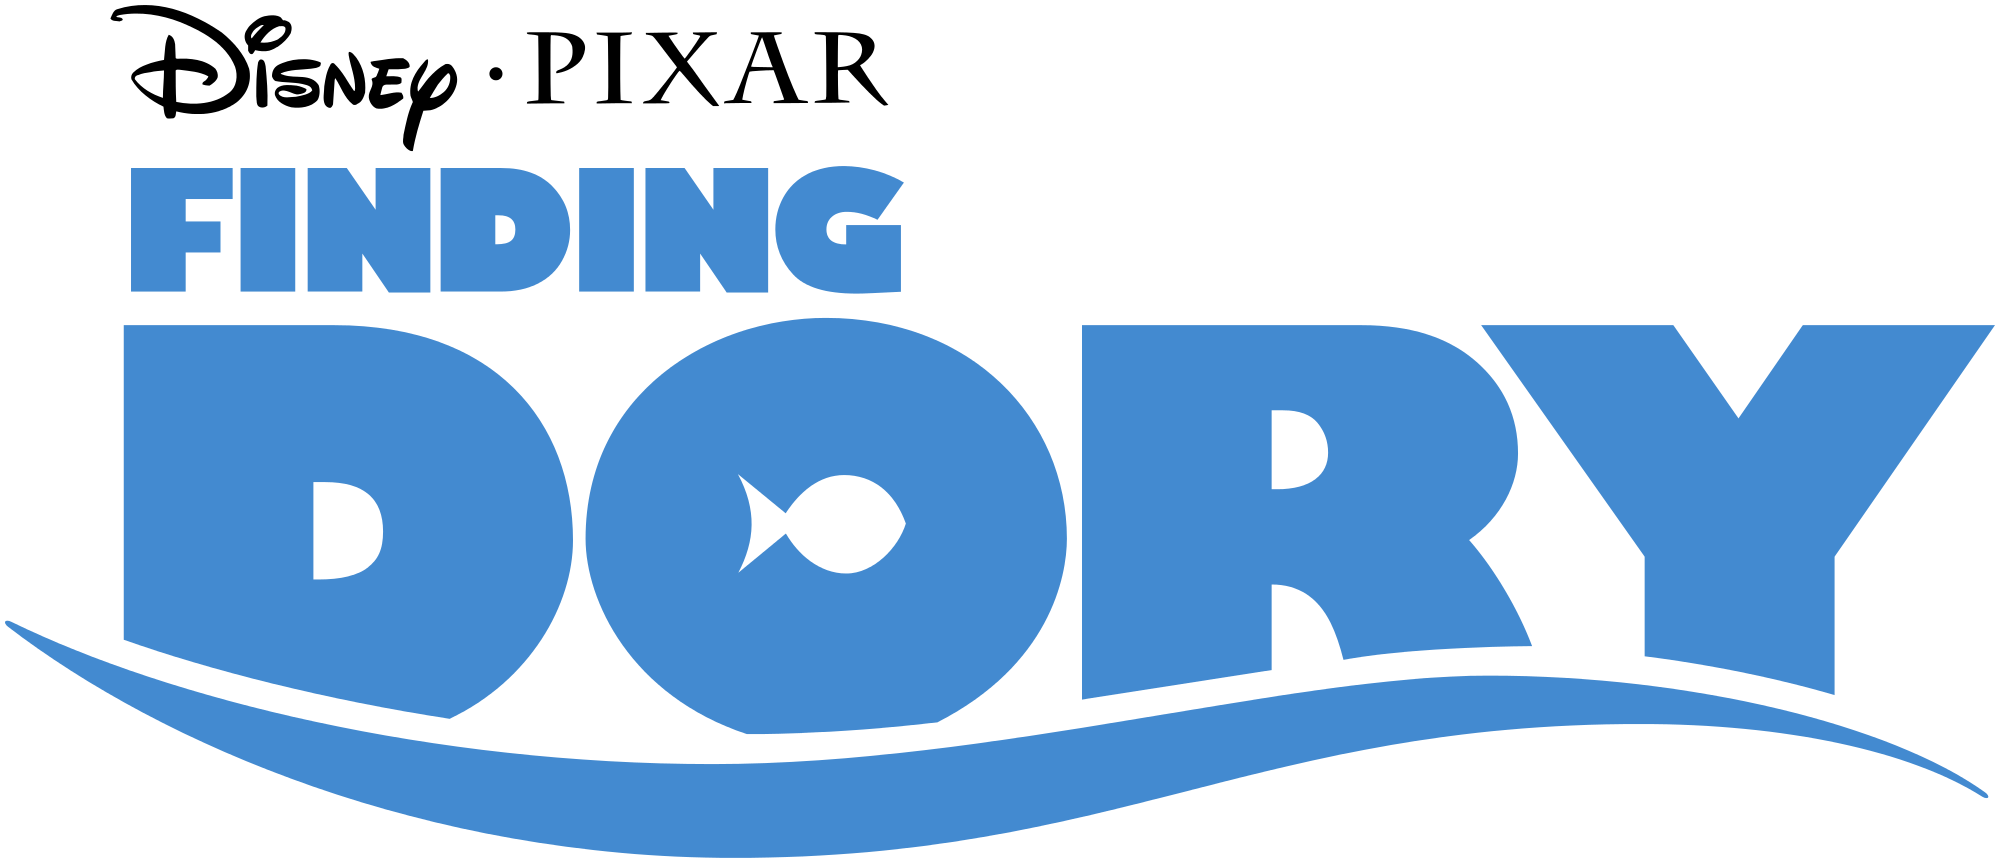 movies clipart finding dory